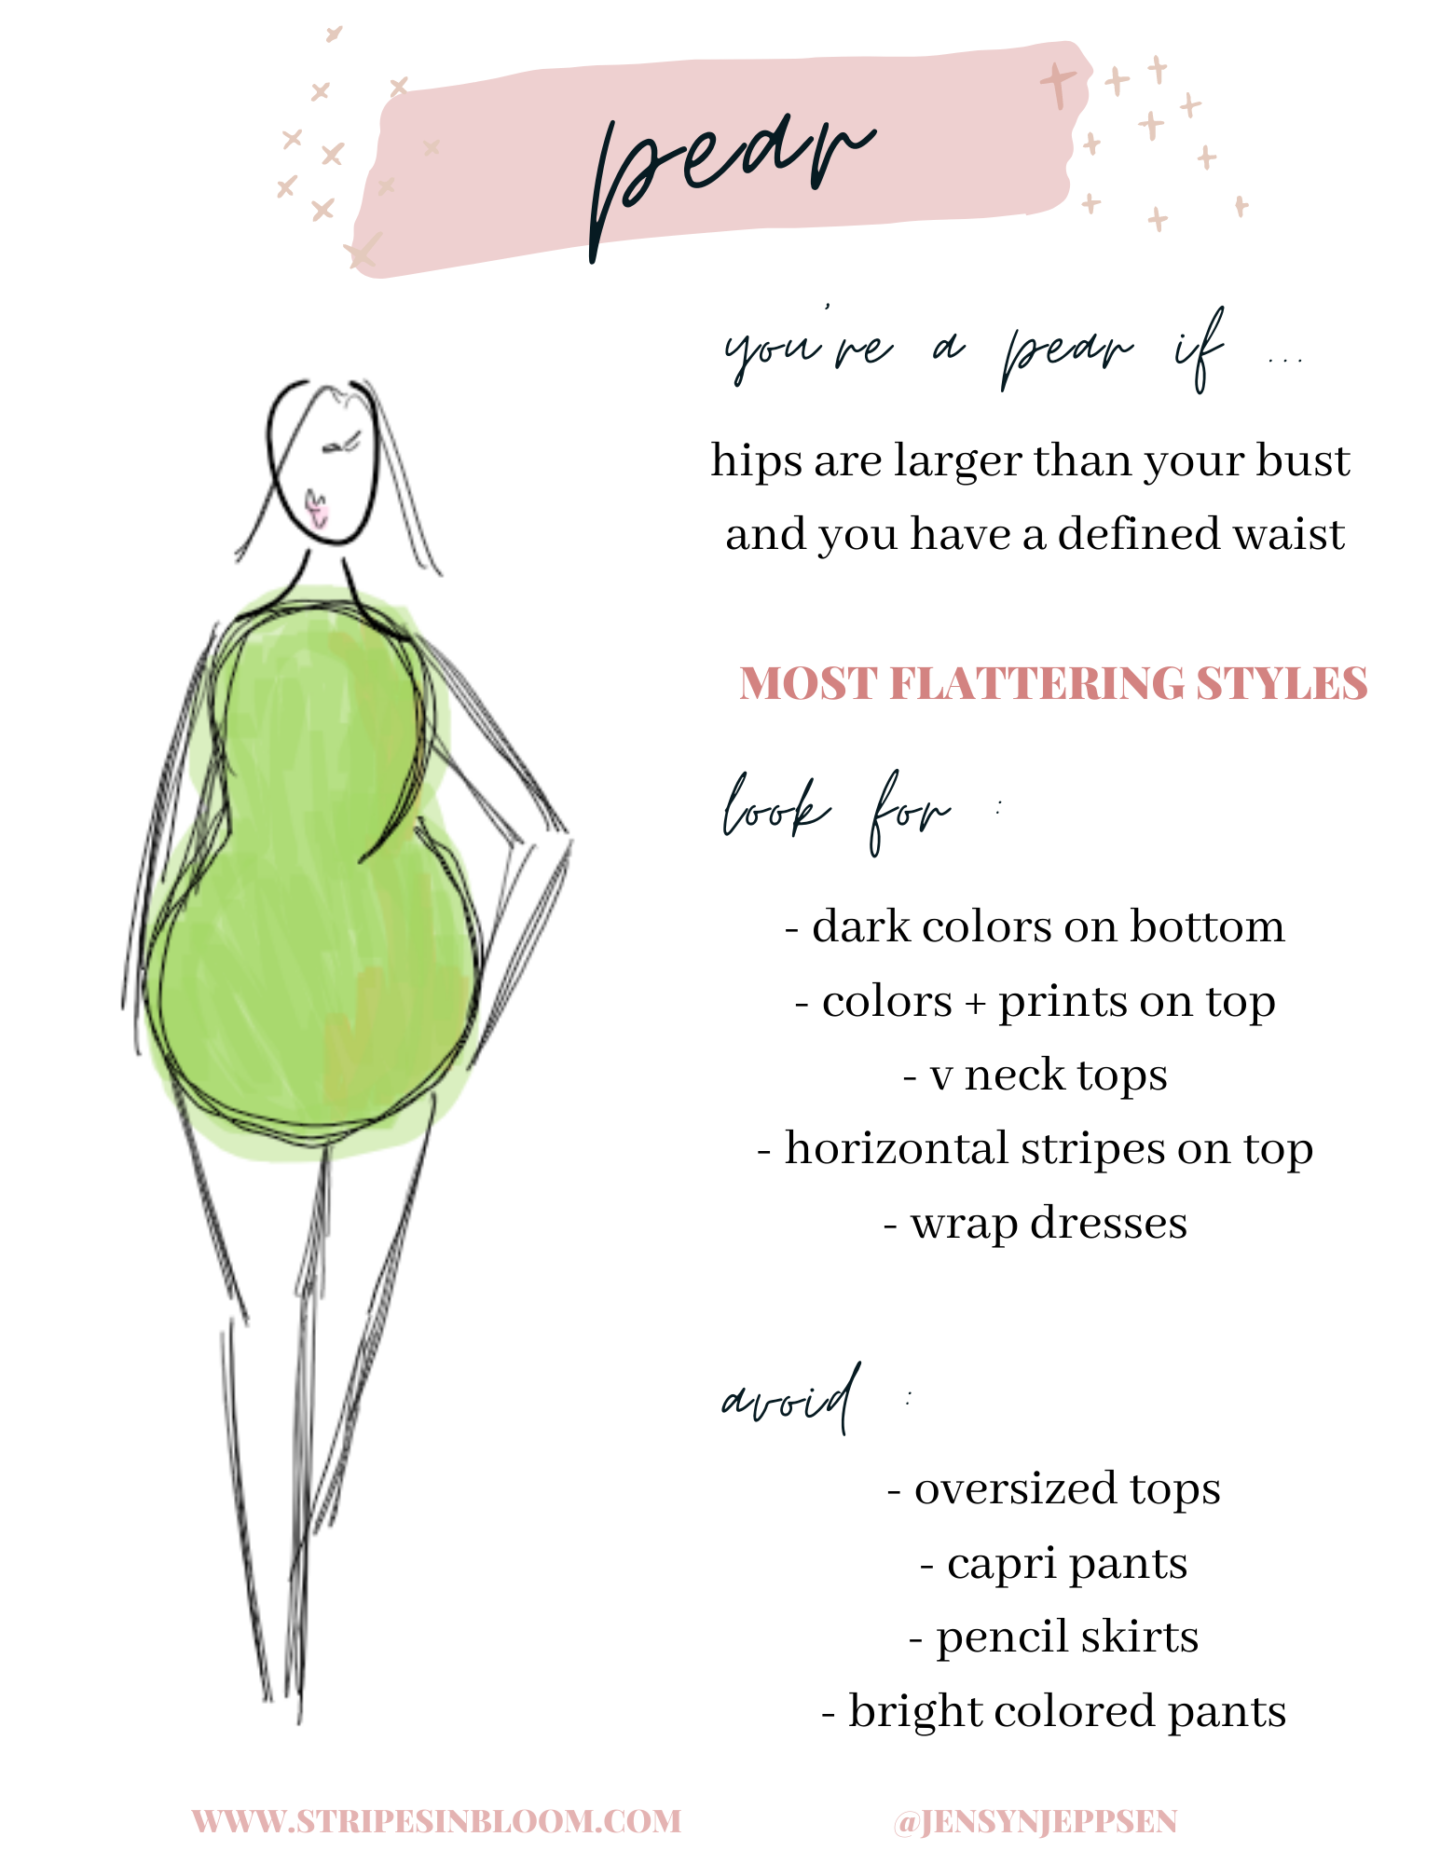 DRESS YOUR BODY TYPE - Stripes in Bloom